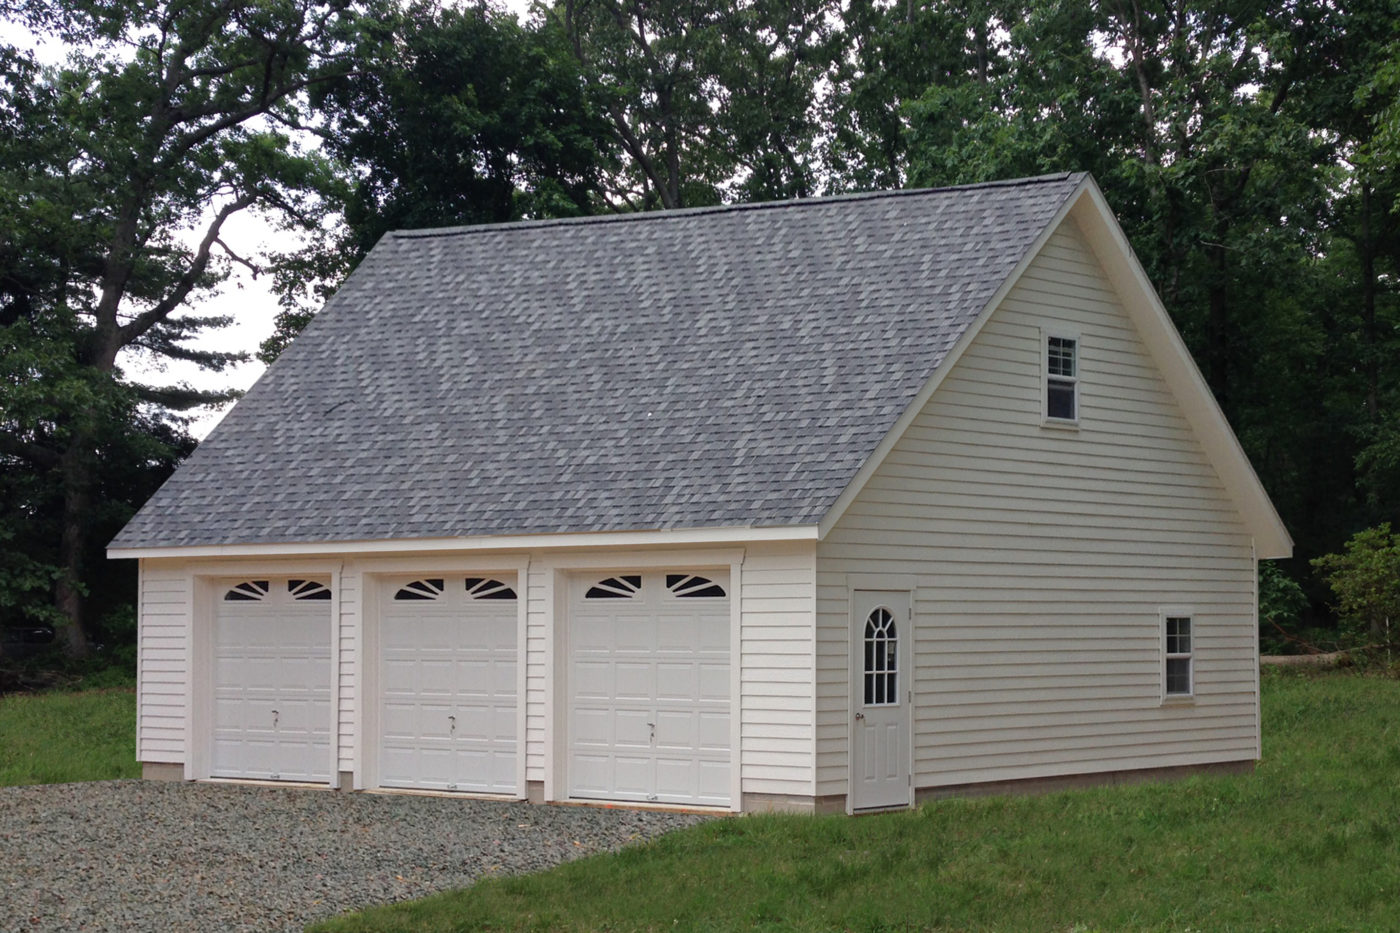 How Much Does A Detached Garage Cost, Cost Per Sq Ft To Build A Detached Garage